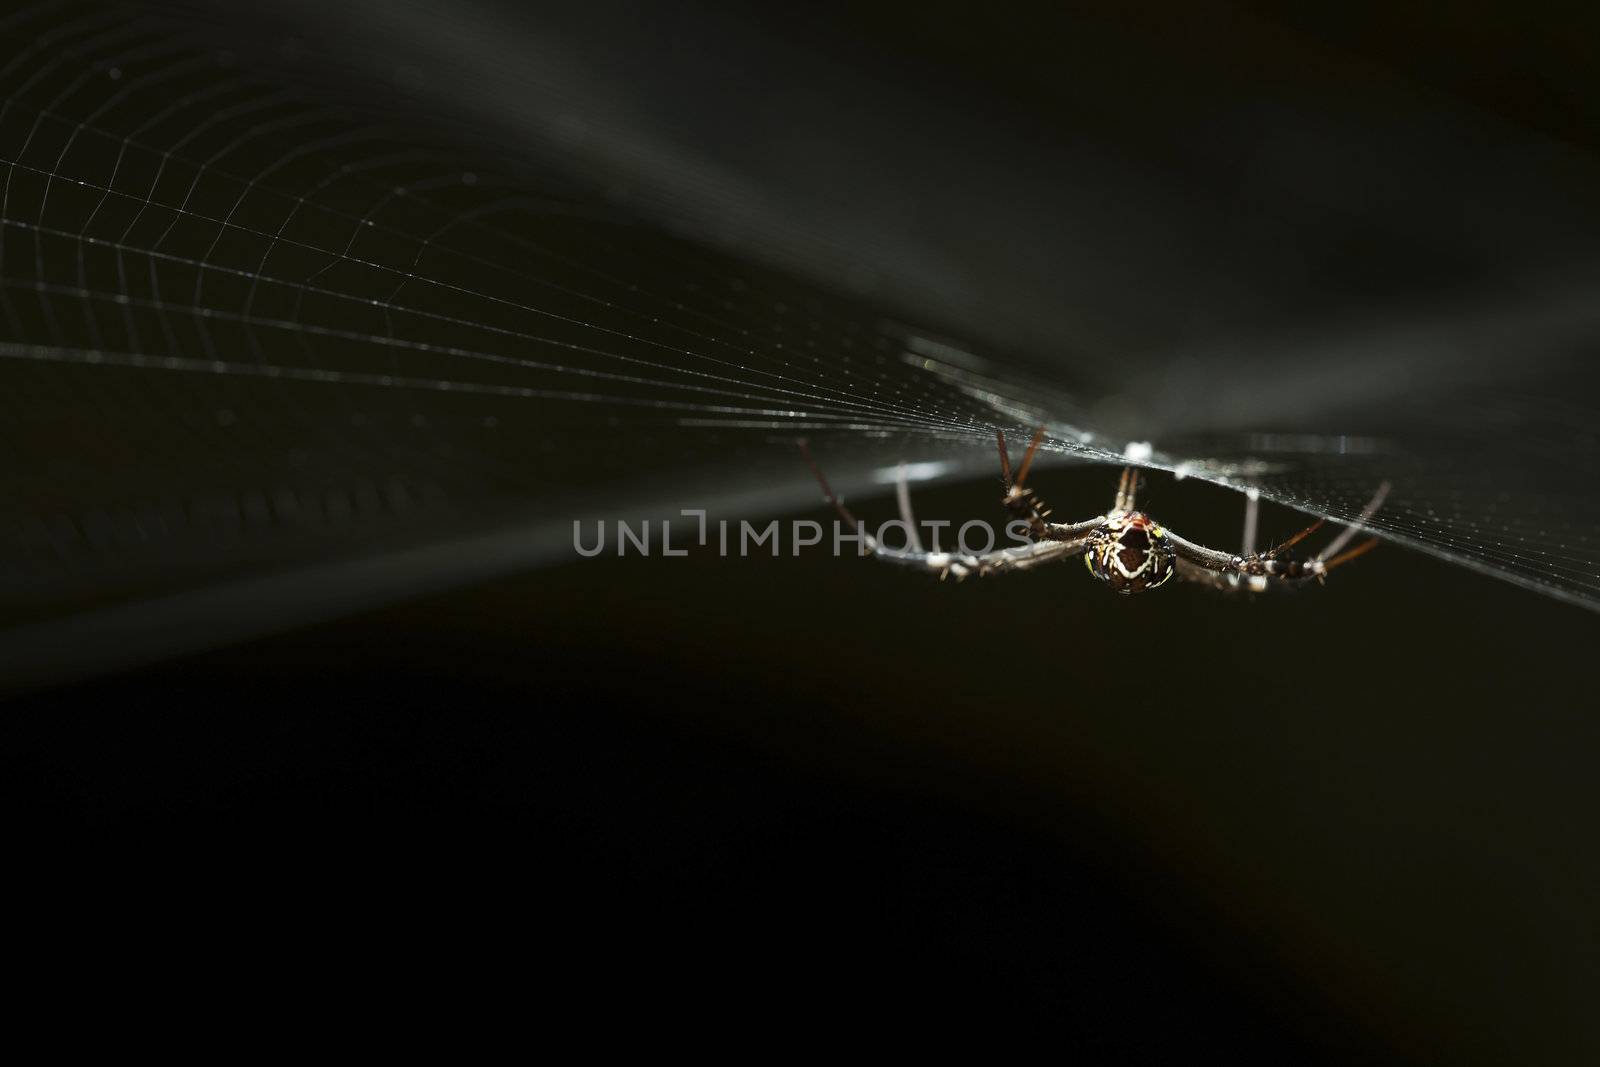 Garden spider on a web by foto76